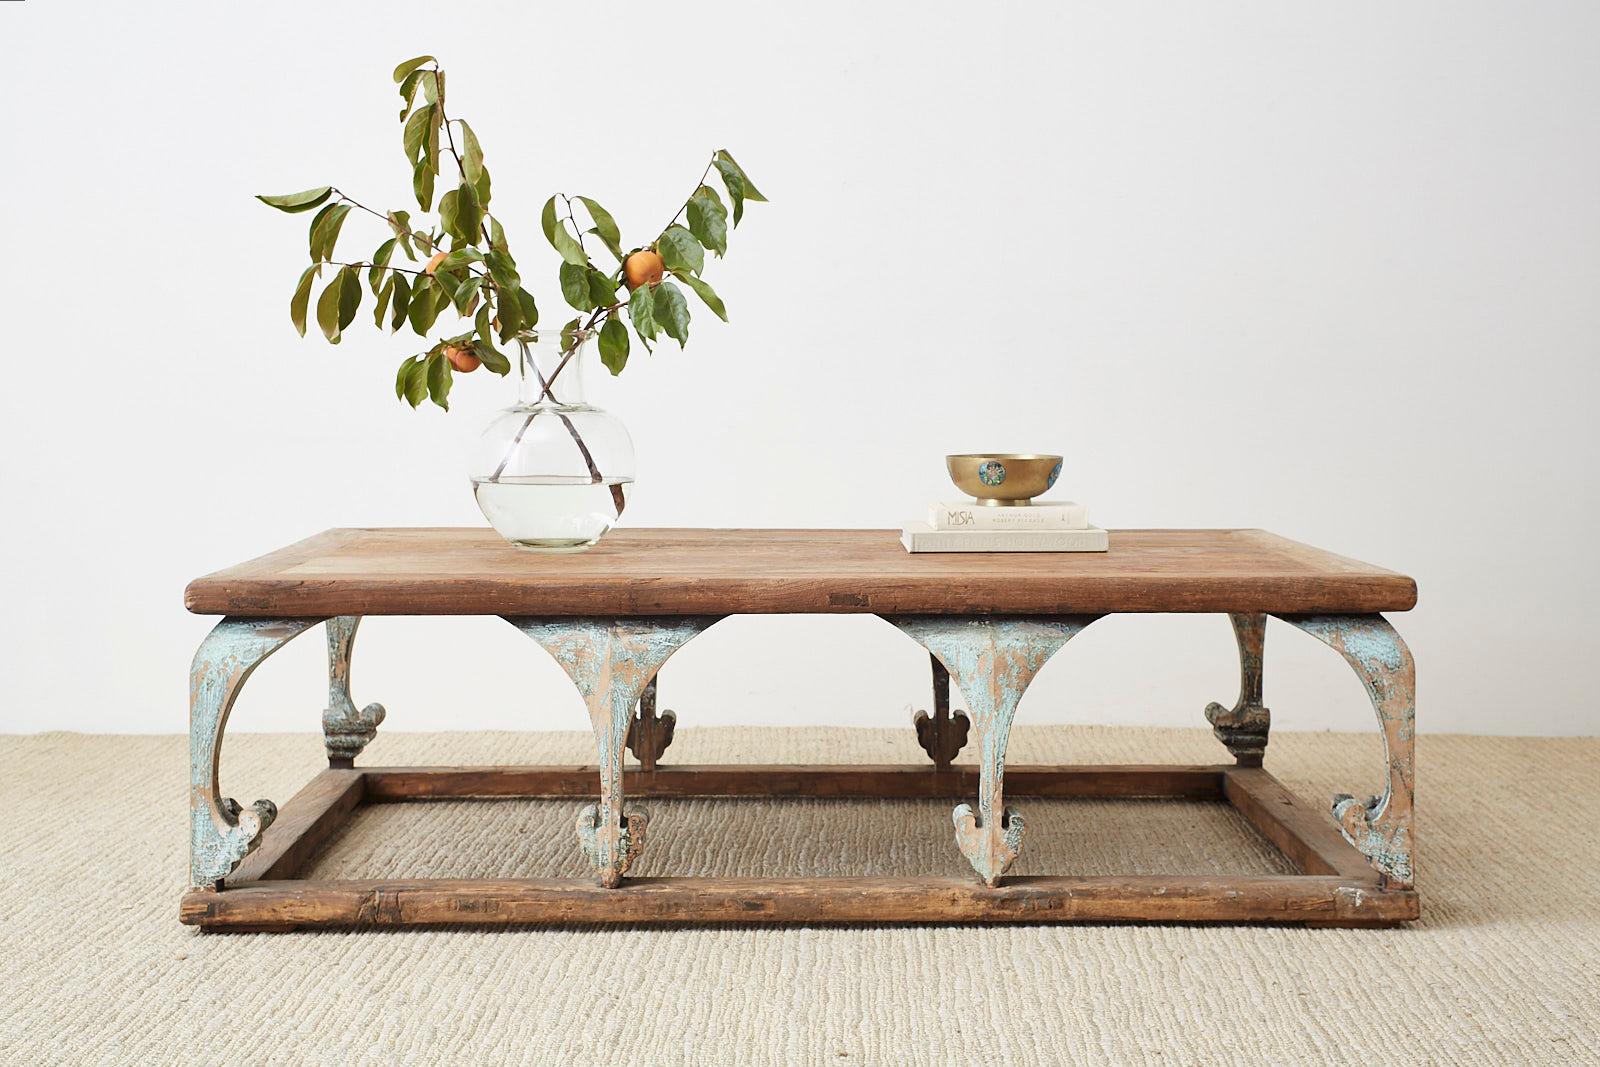 Monumental rectangular coffee or cocktail table having a rustic, weathered patina. Constructed from reclaimed pine featuring arched legs with a spade foot motif. The supports have a distressed polychrome finish with lacquer paint remnants. The aged